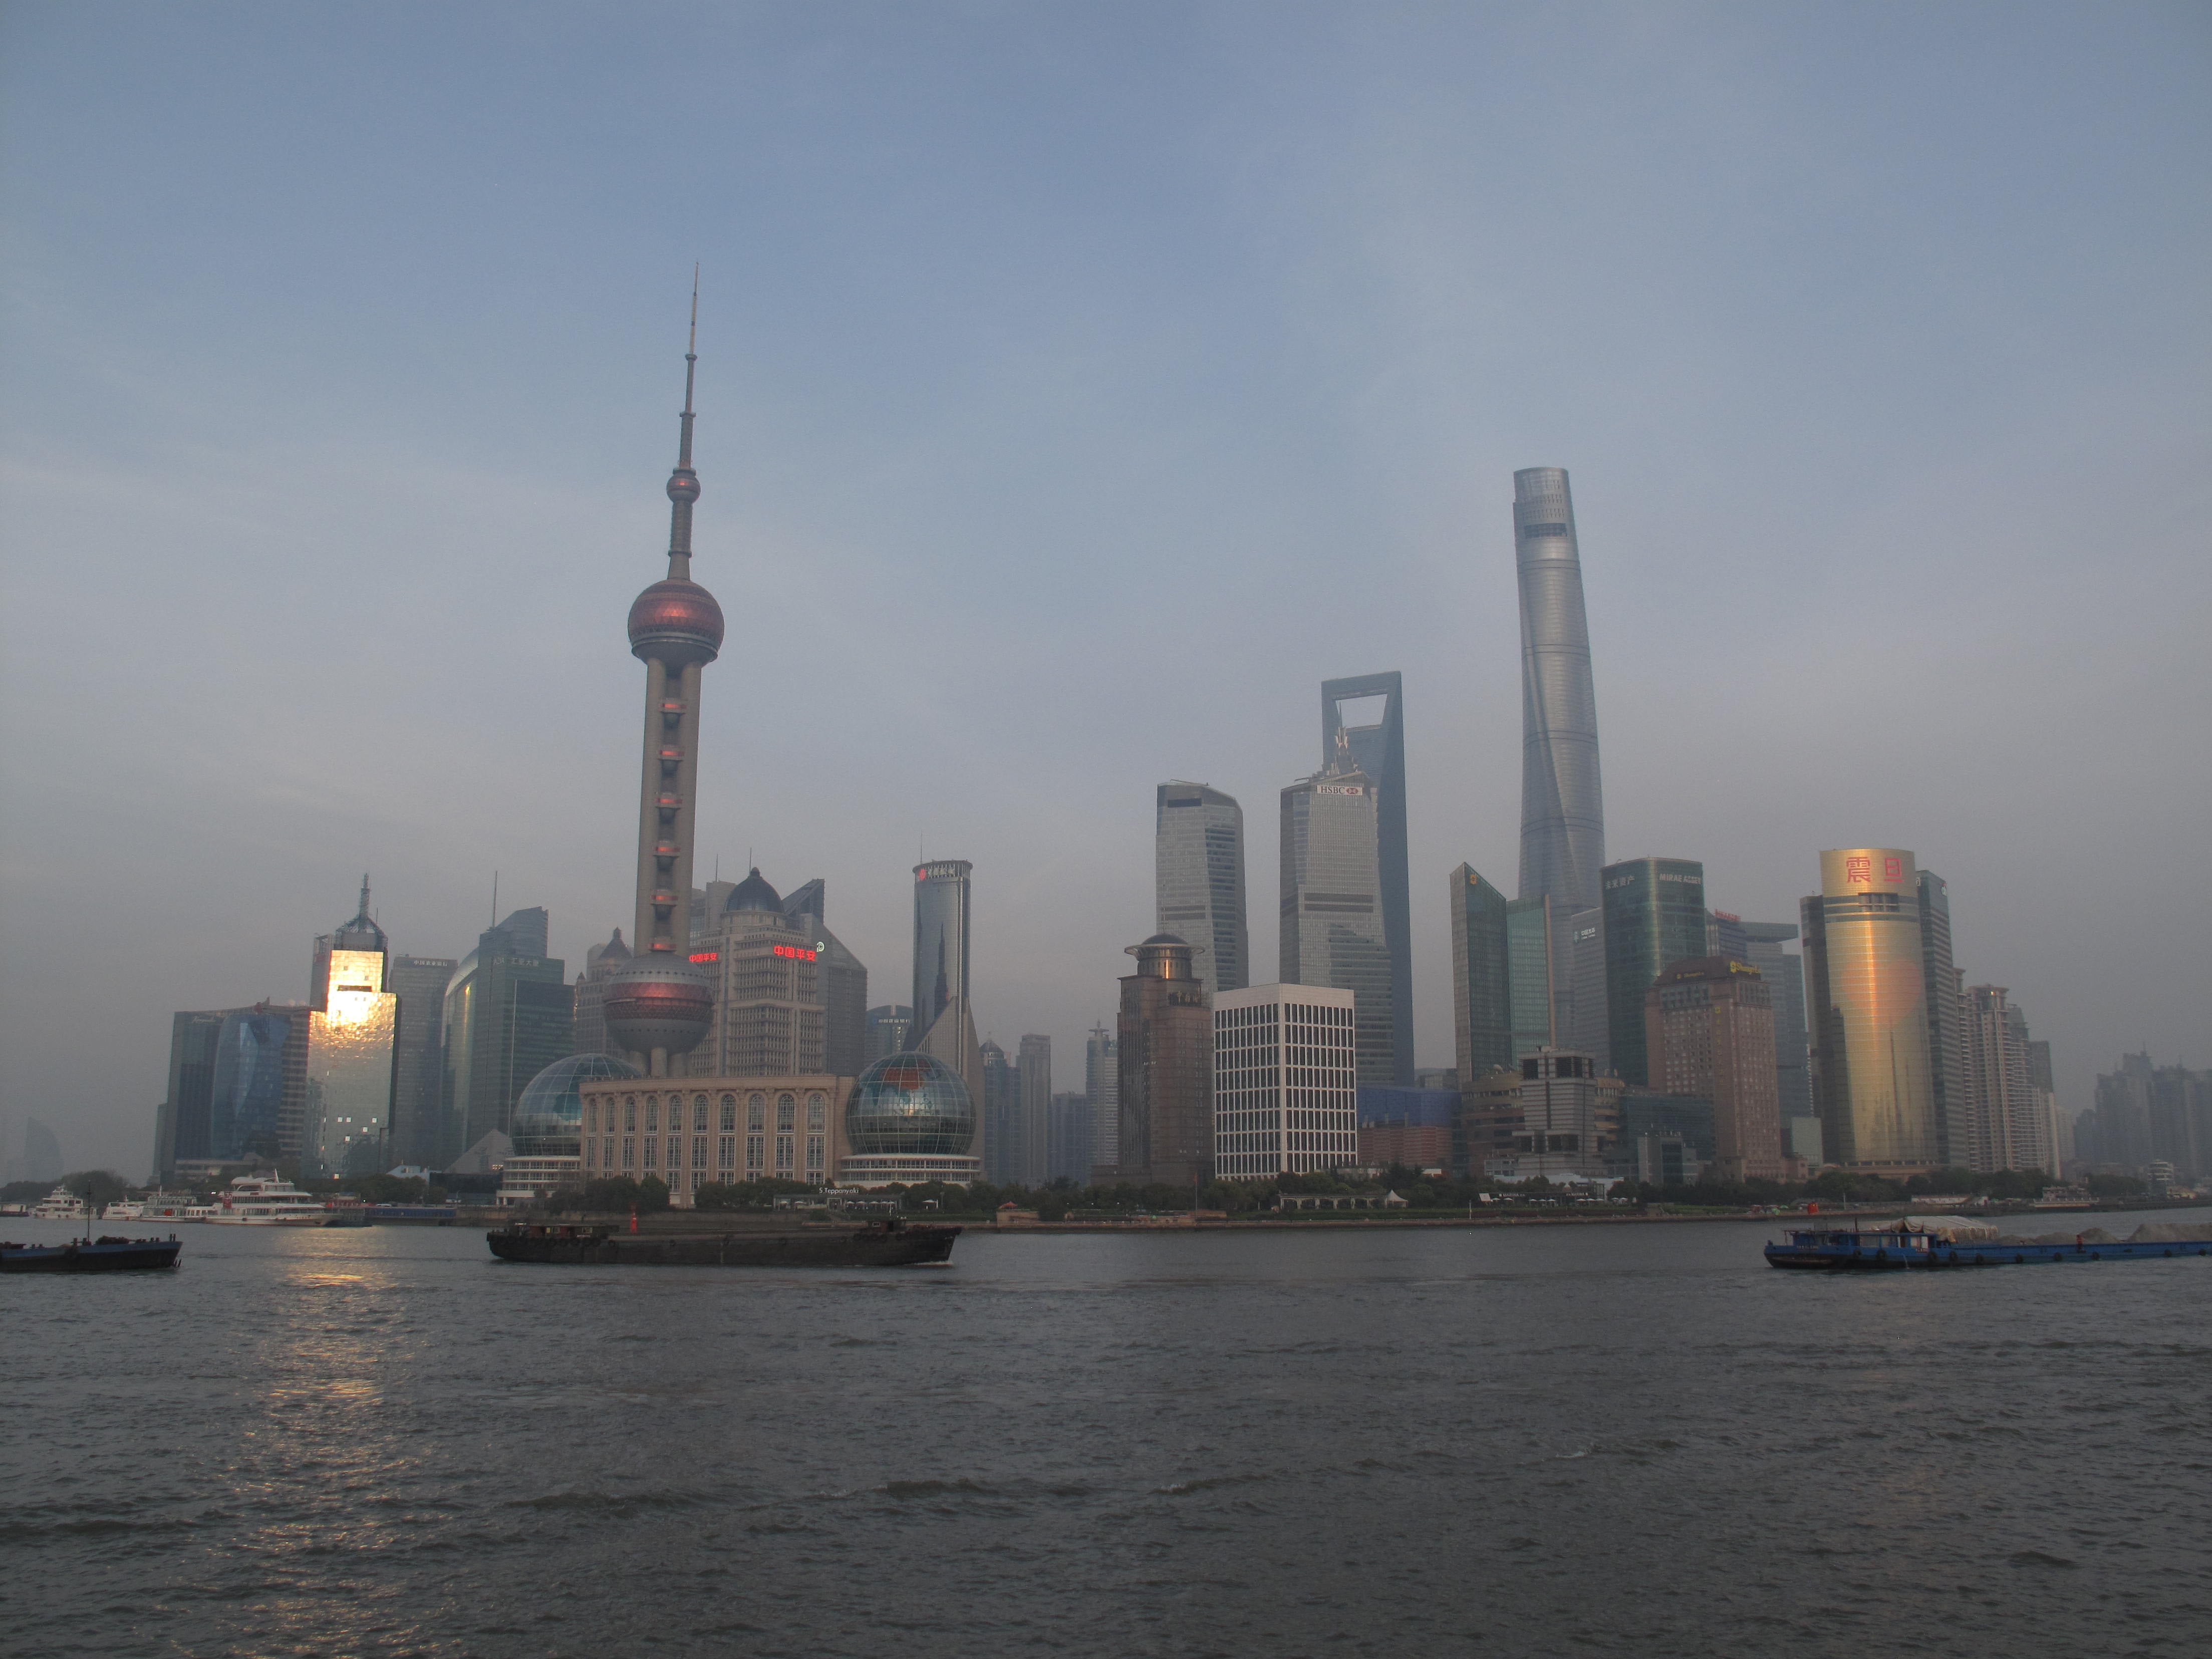 World beating: the Pudong area of Shanghai